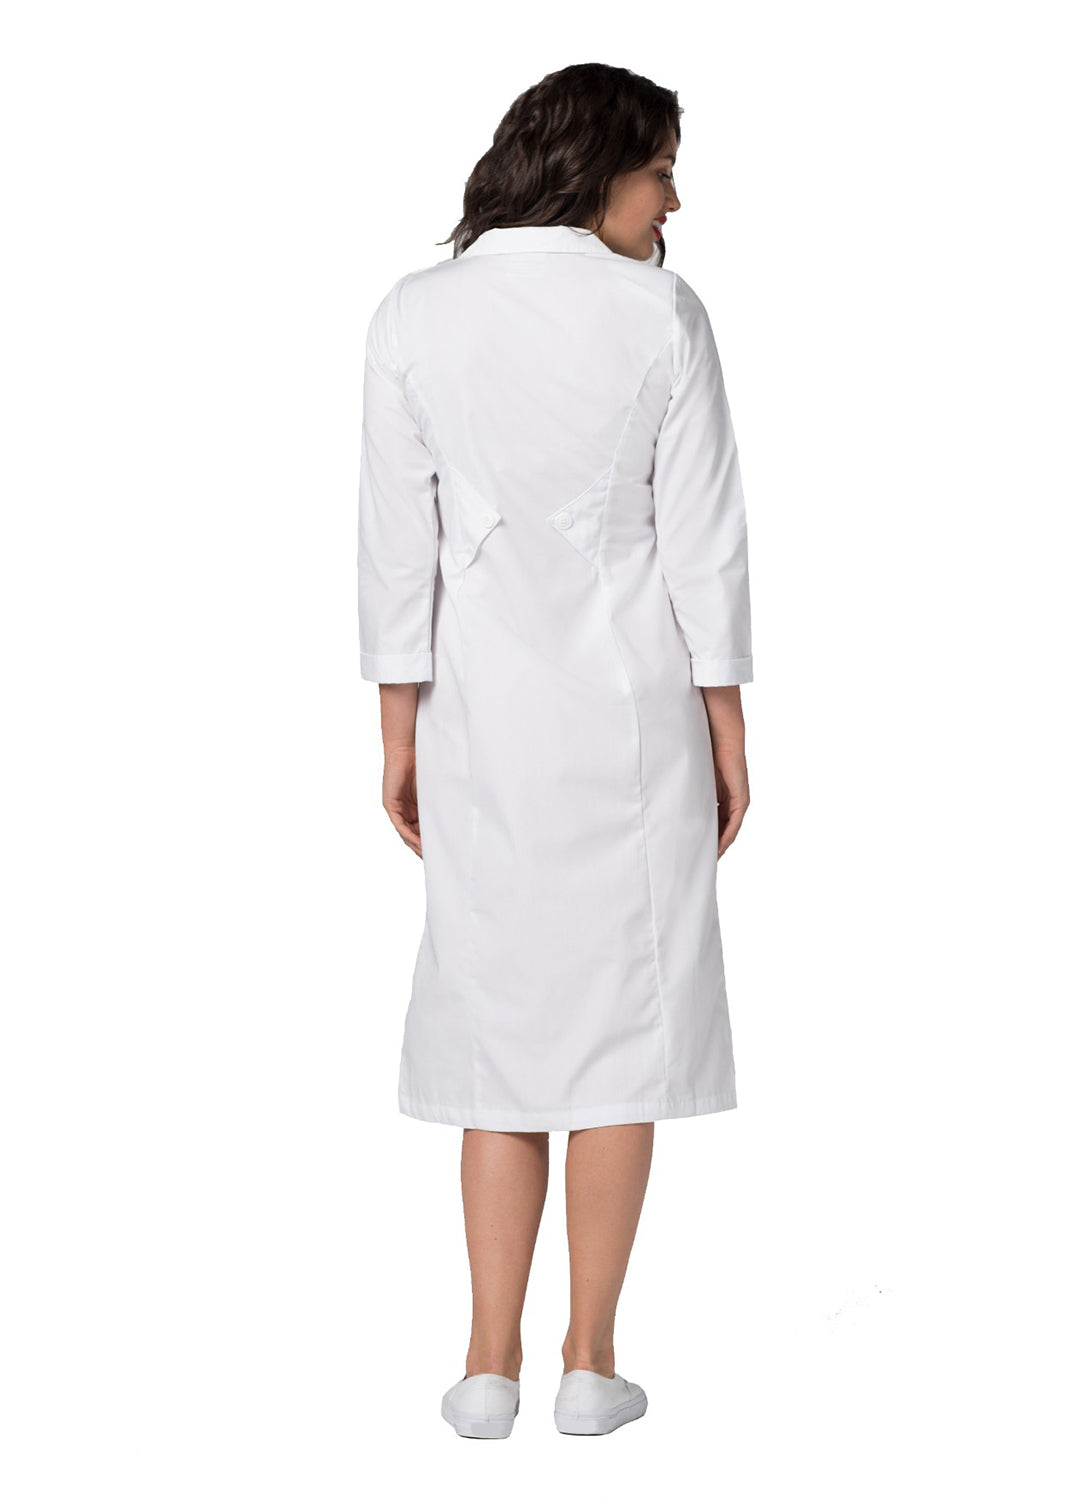 Adar Universal Double Embroidered Collar Dress